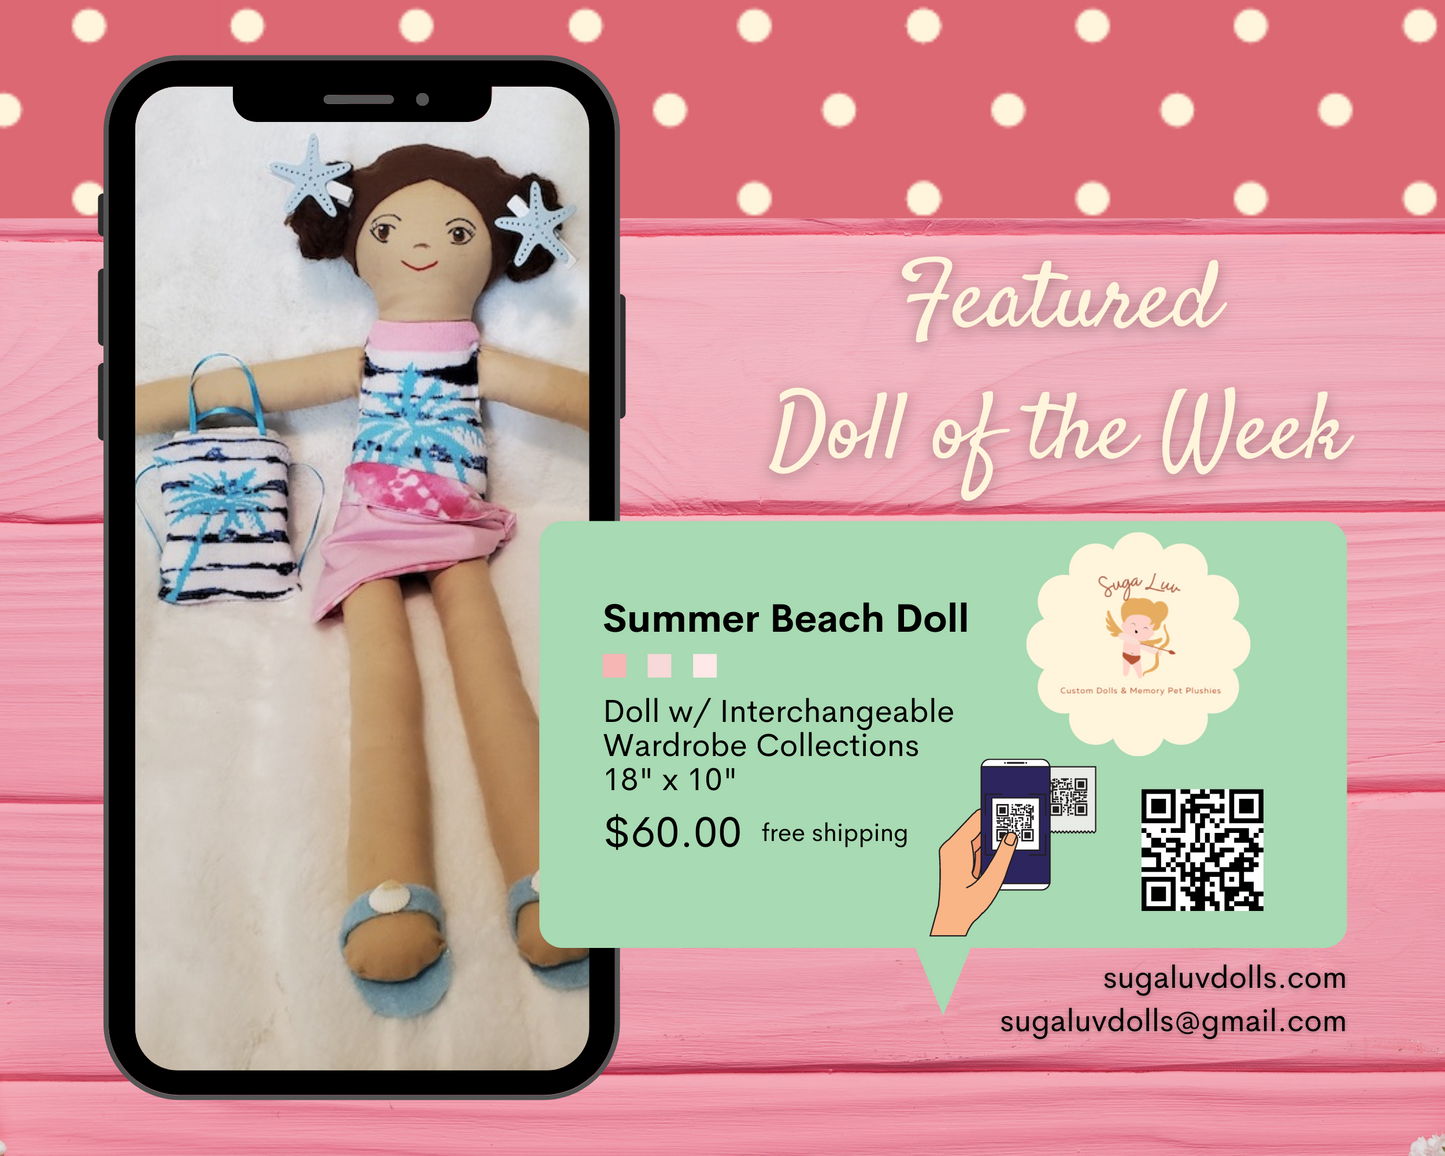 Handmade Doll and doll clothing, Summer